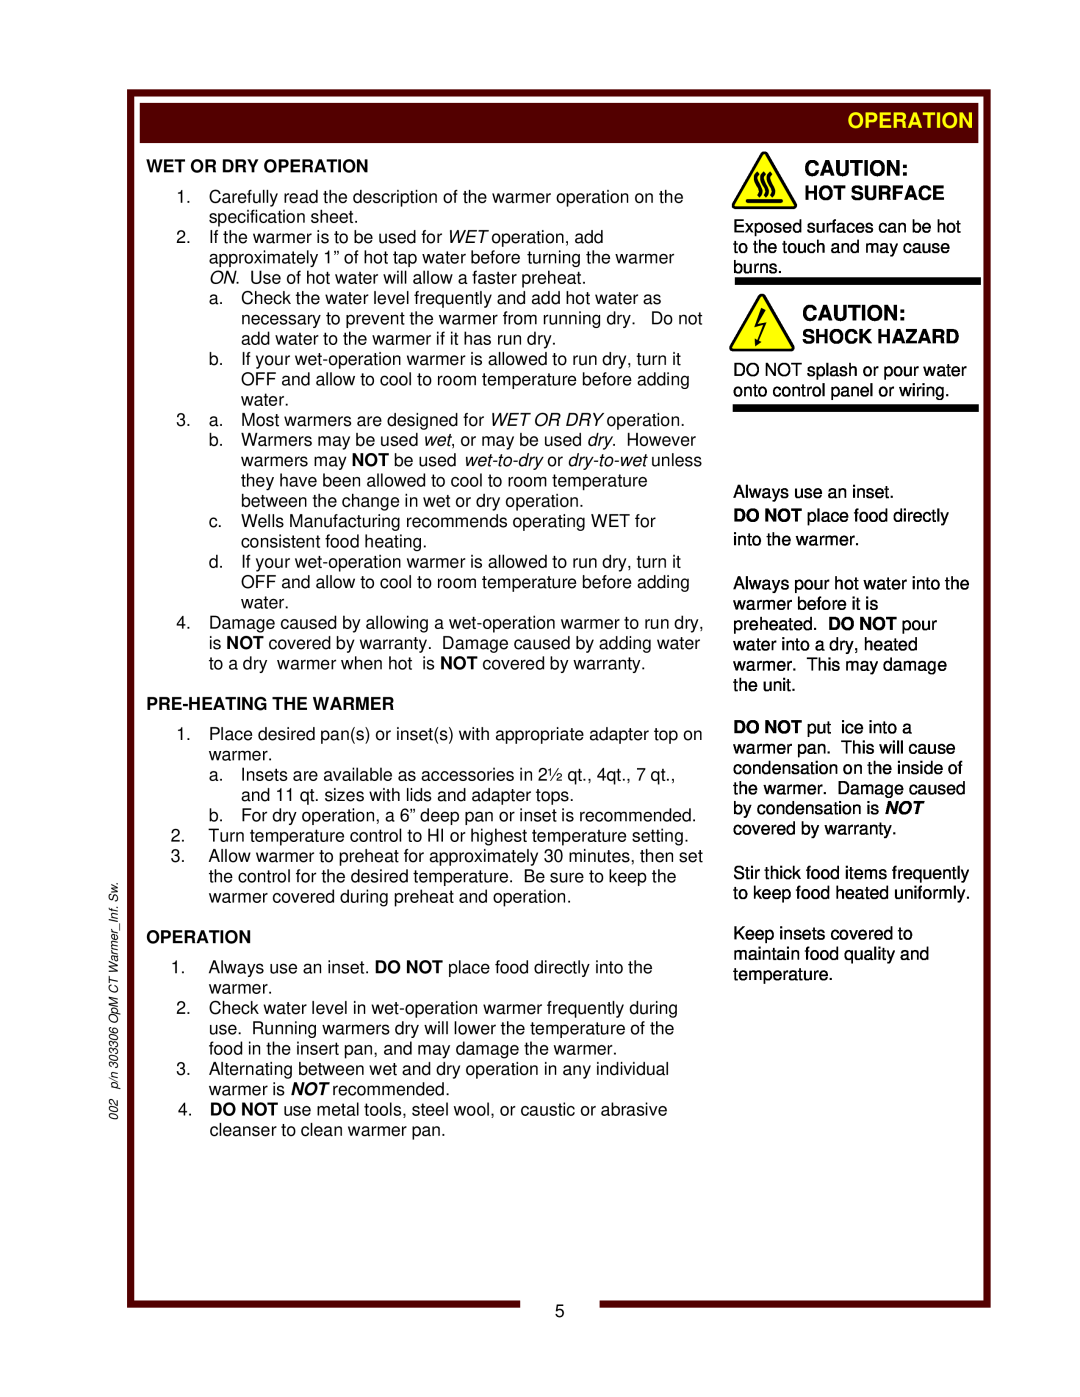 Wells SW-10 operation manual Hot Surface, Shock Hazard, Wet Or Dry Operation, Pre-Heating The Warmer 